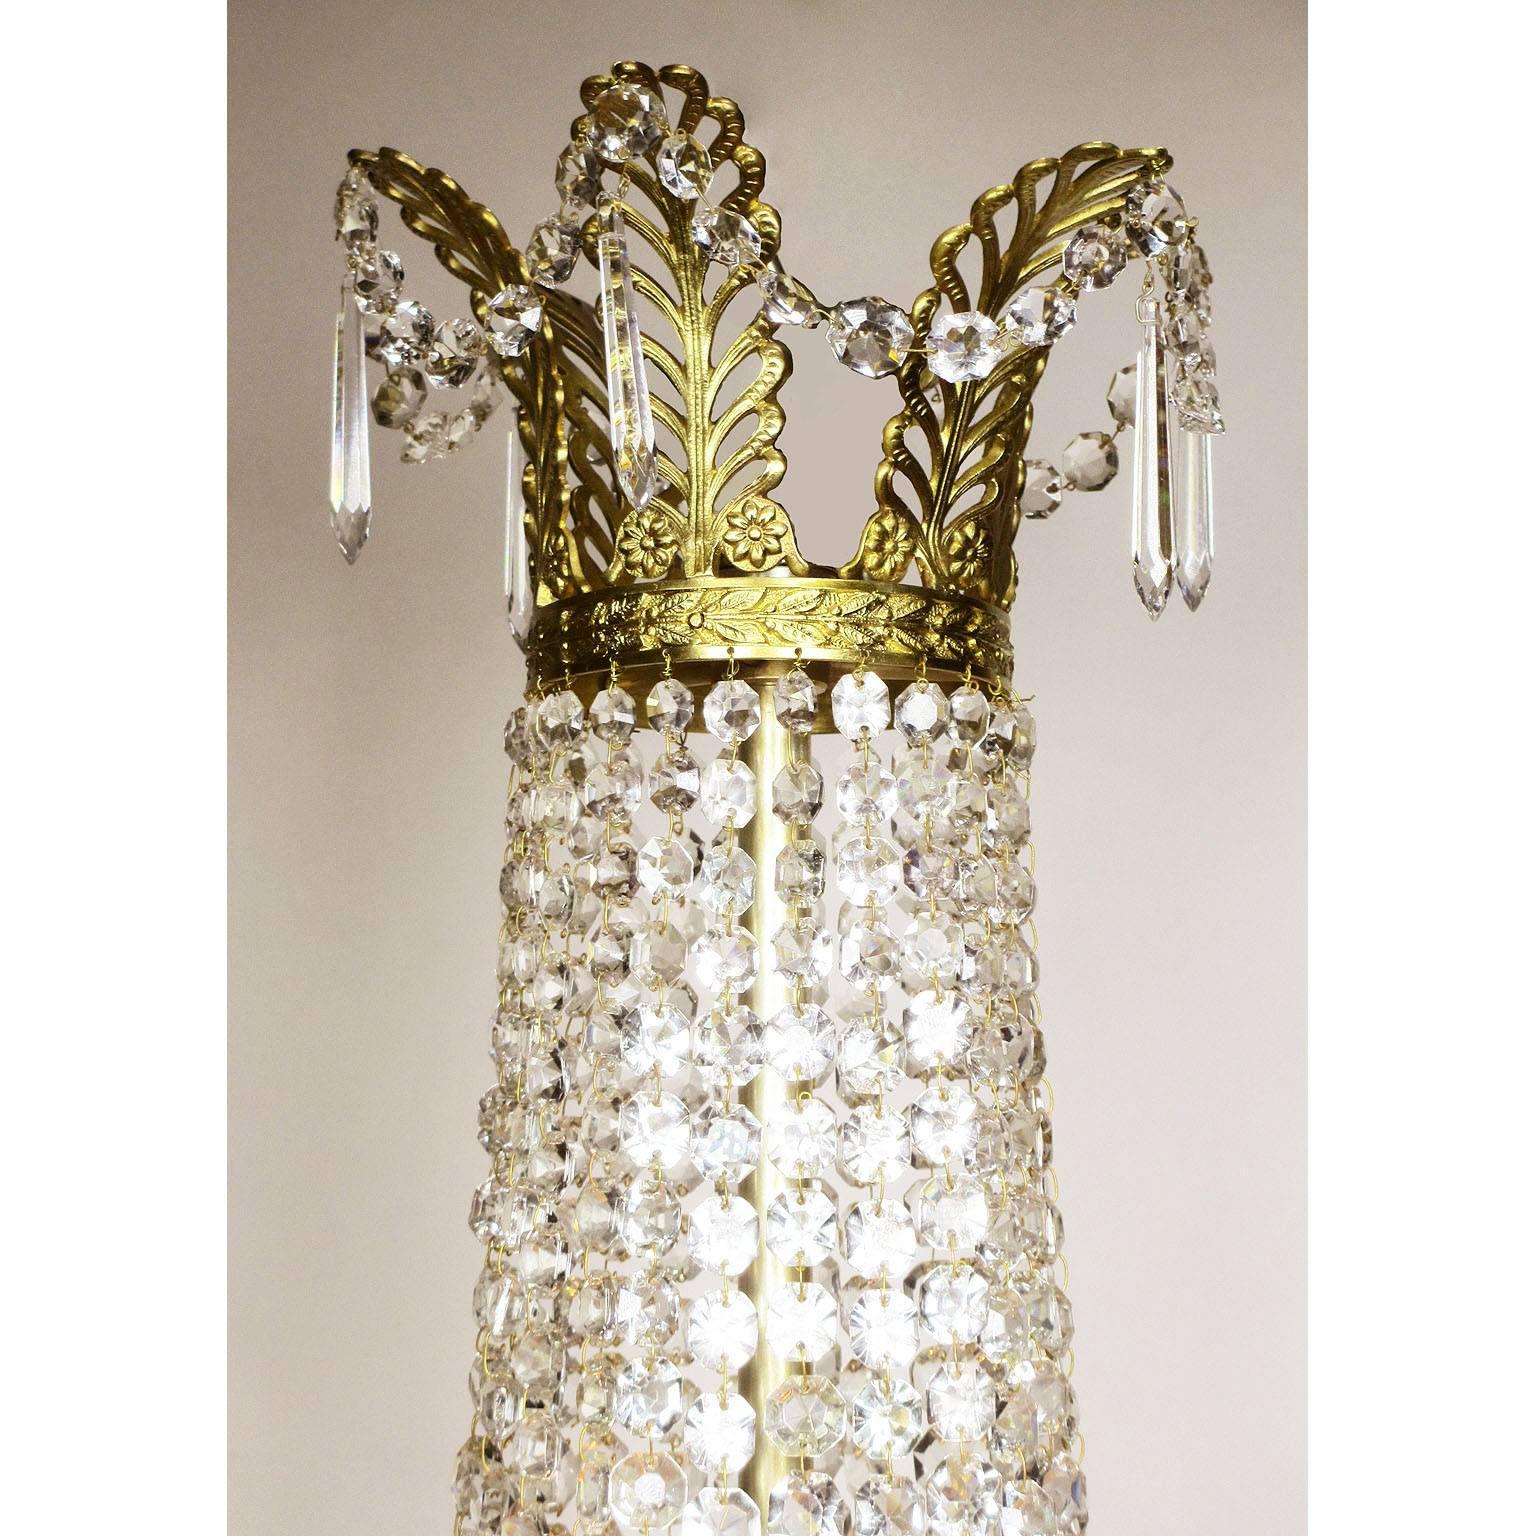 A fine French 19th-20th century Empire style gilt metal and cut-glass beaded basket style ten-light chandelier with wreaths and garlands, Paris, circa, 1900.
Measures:
Height: 41 1/4 inches (104.8 cm).
Width: 21 inches (53.4 cm).

